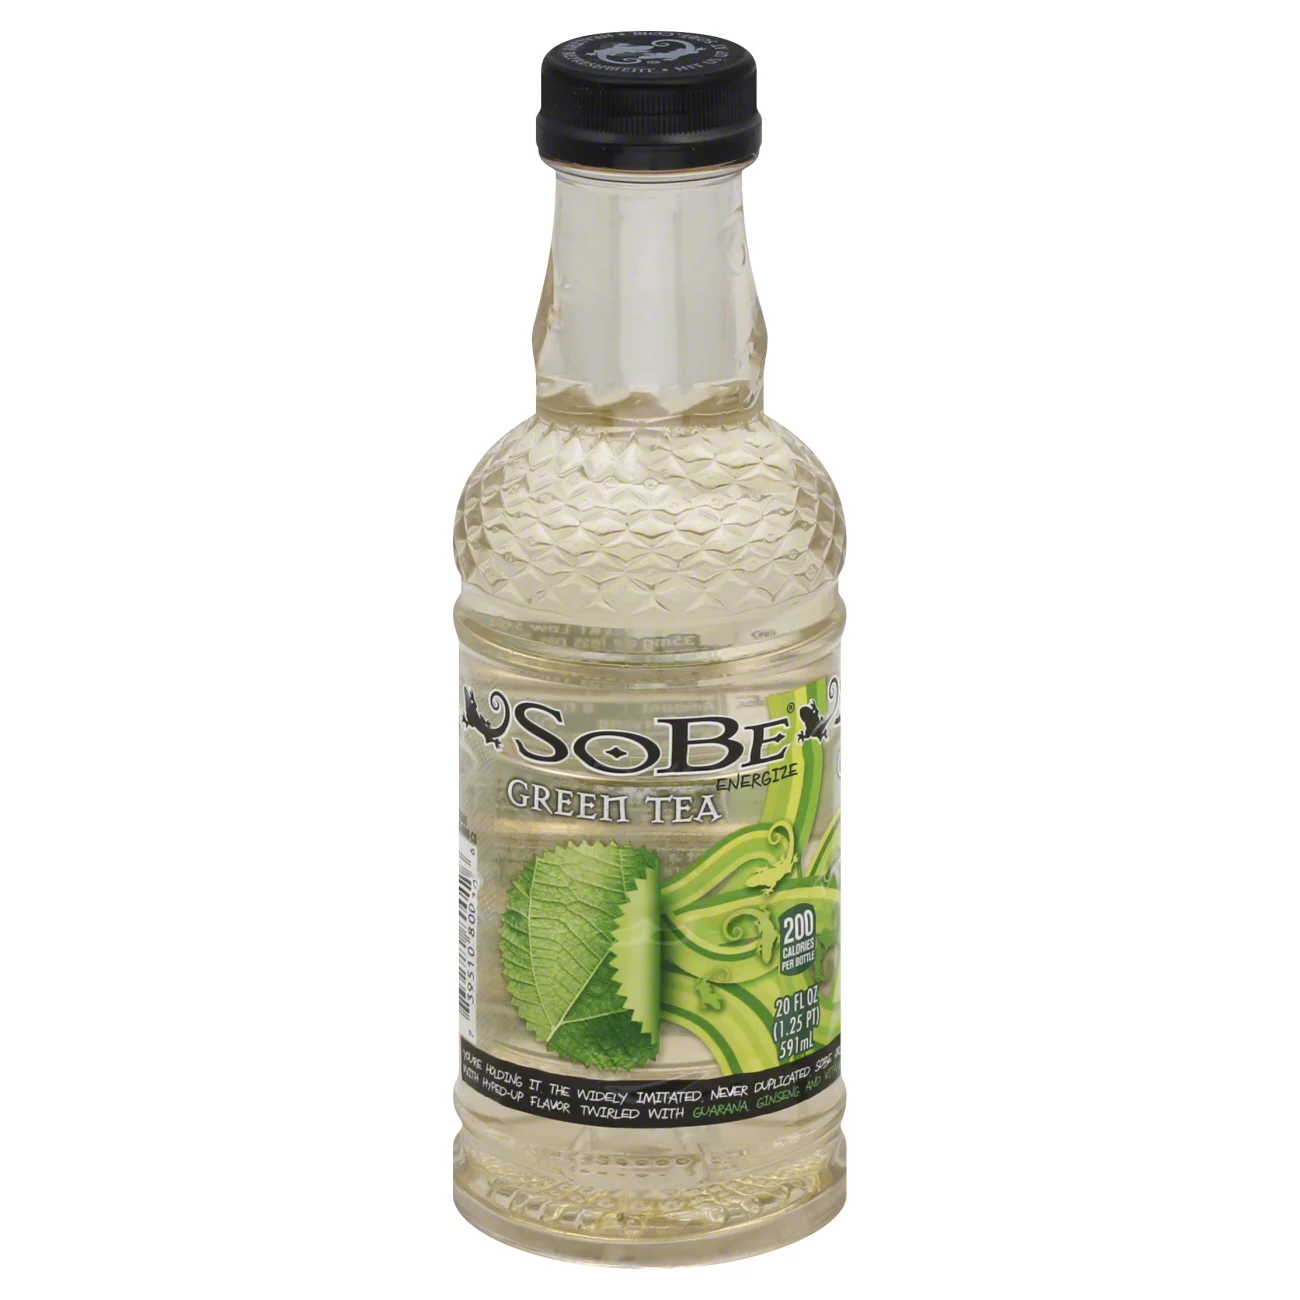 Sobe Green Tea: A Blast from the Past or a Timeless Beverage?